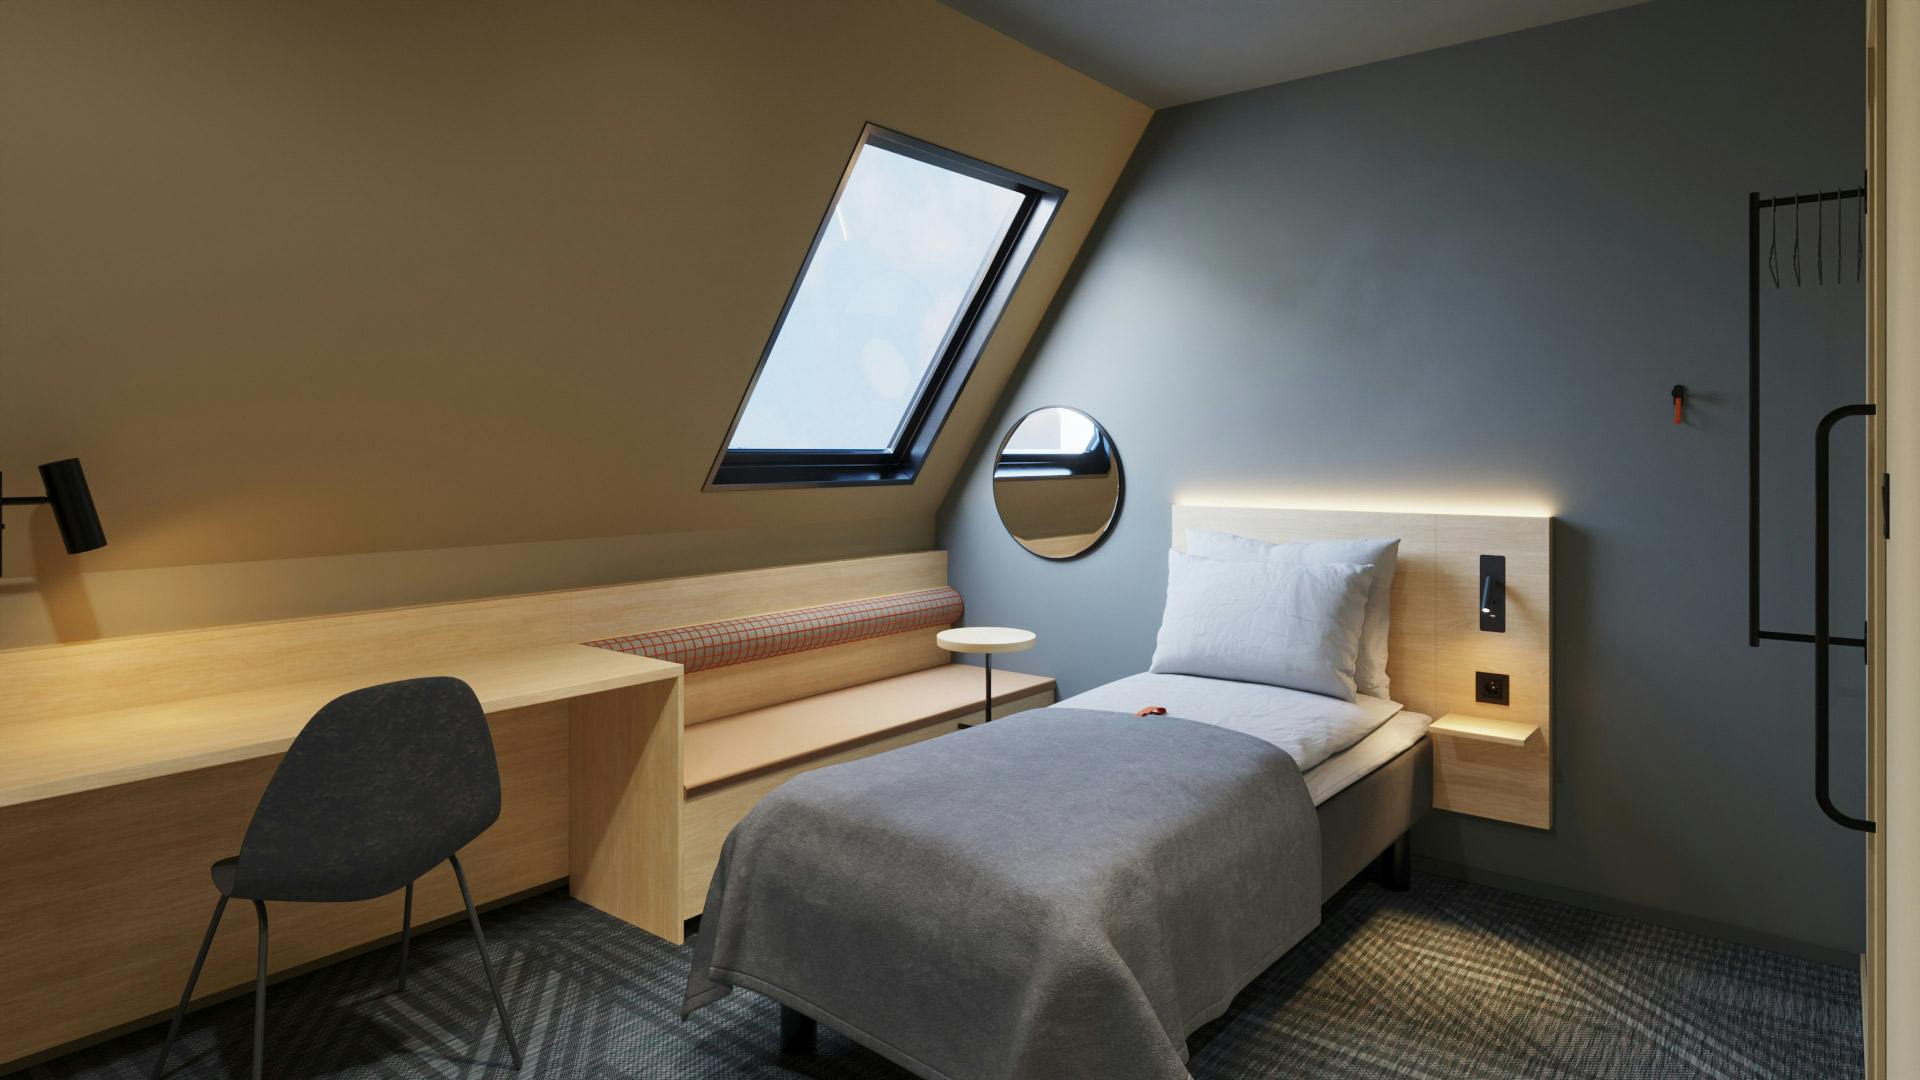 Single room in Citybox Brussels. Single bed with seating area, chair and desk.